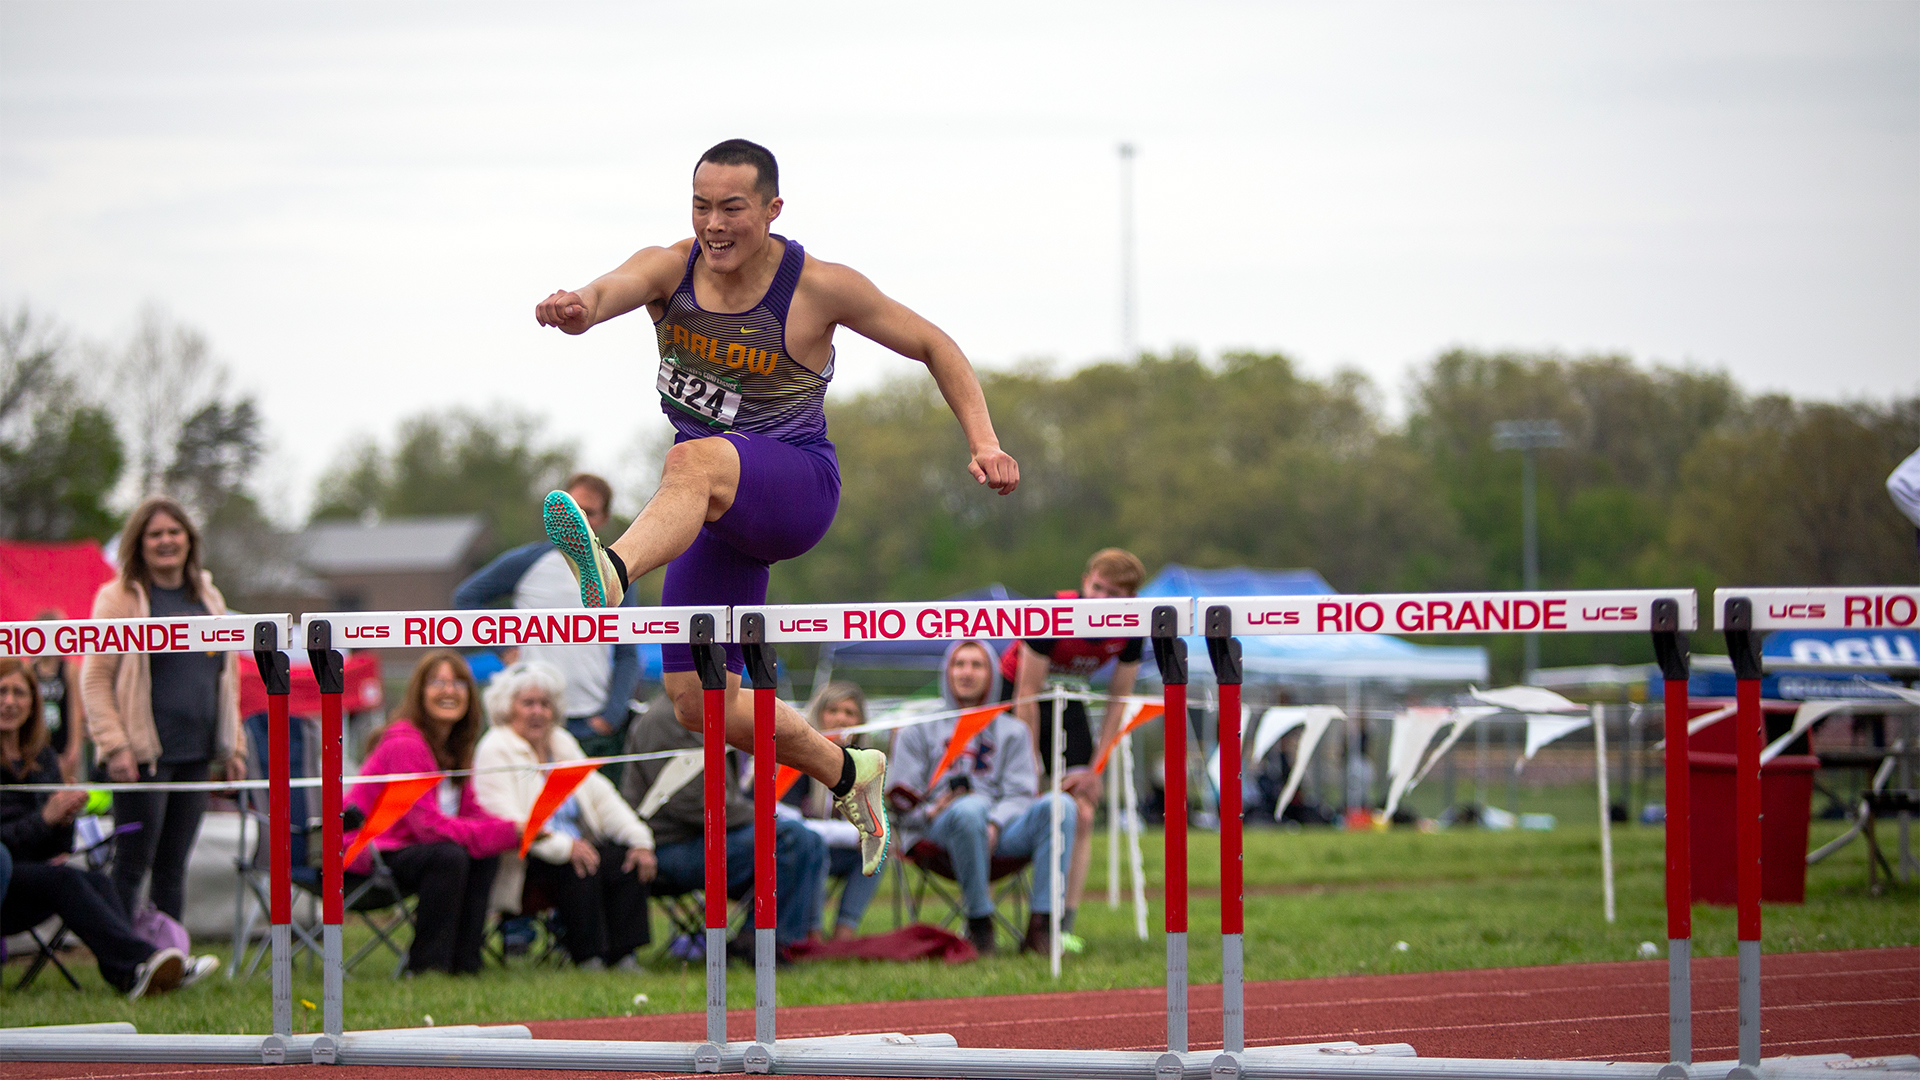 Bryan Pan broke his own school record in the 110-meter hurdles. Archived photo by William Conley.